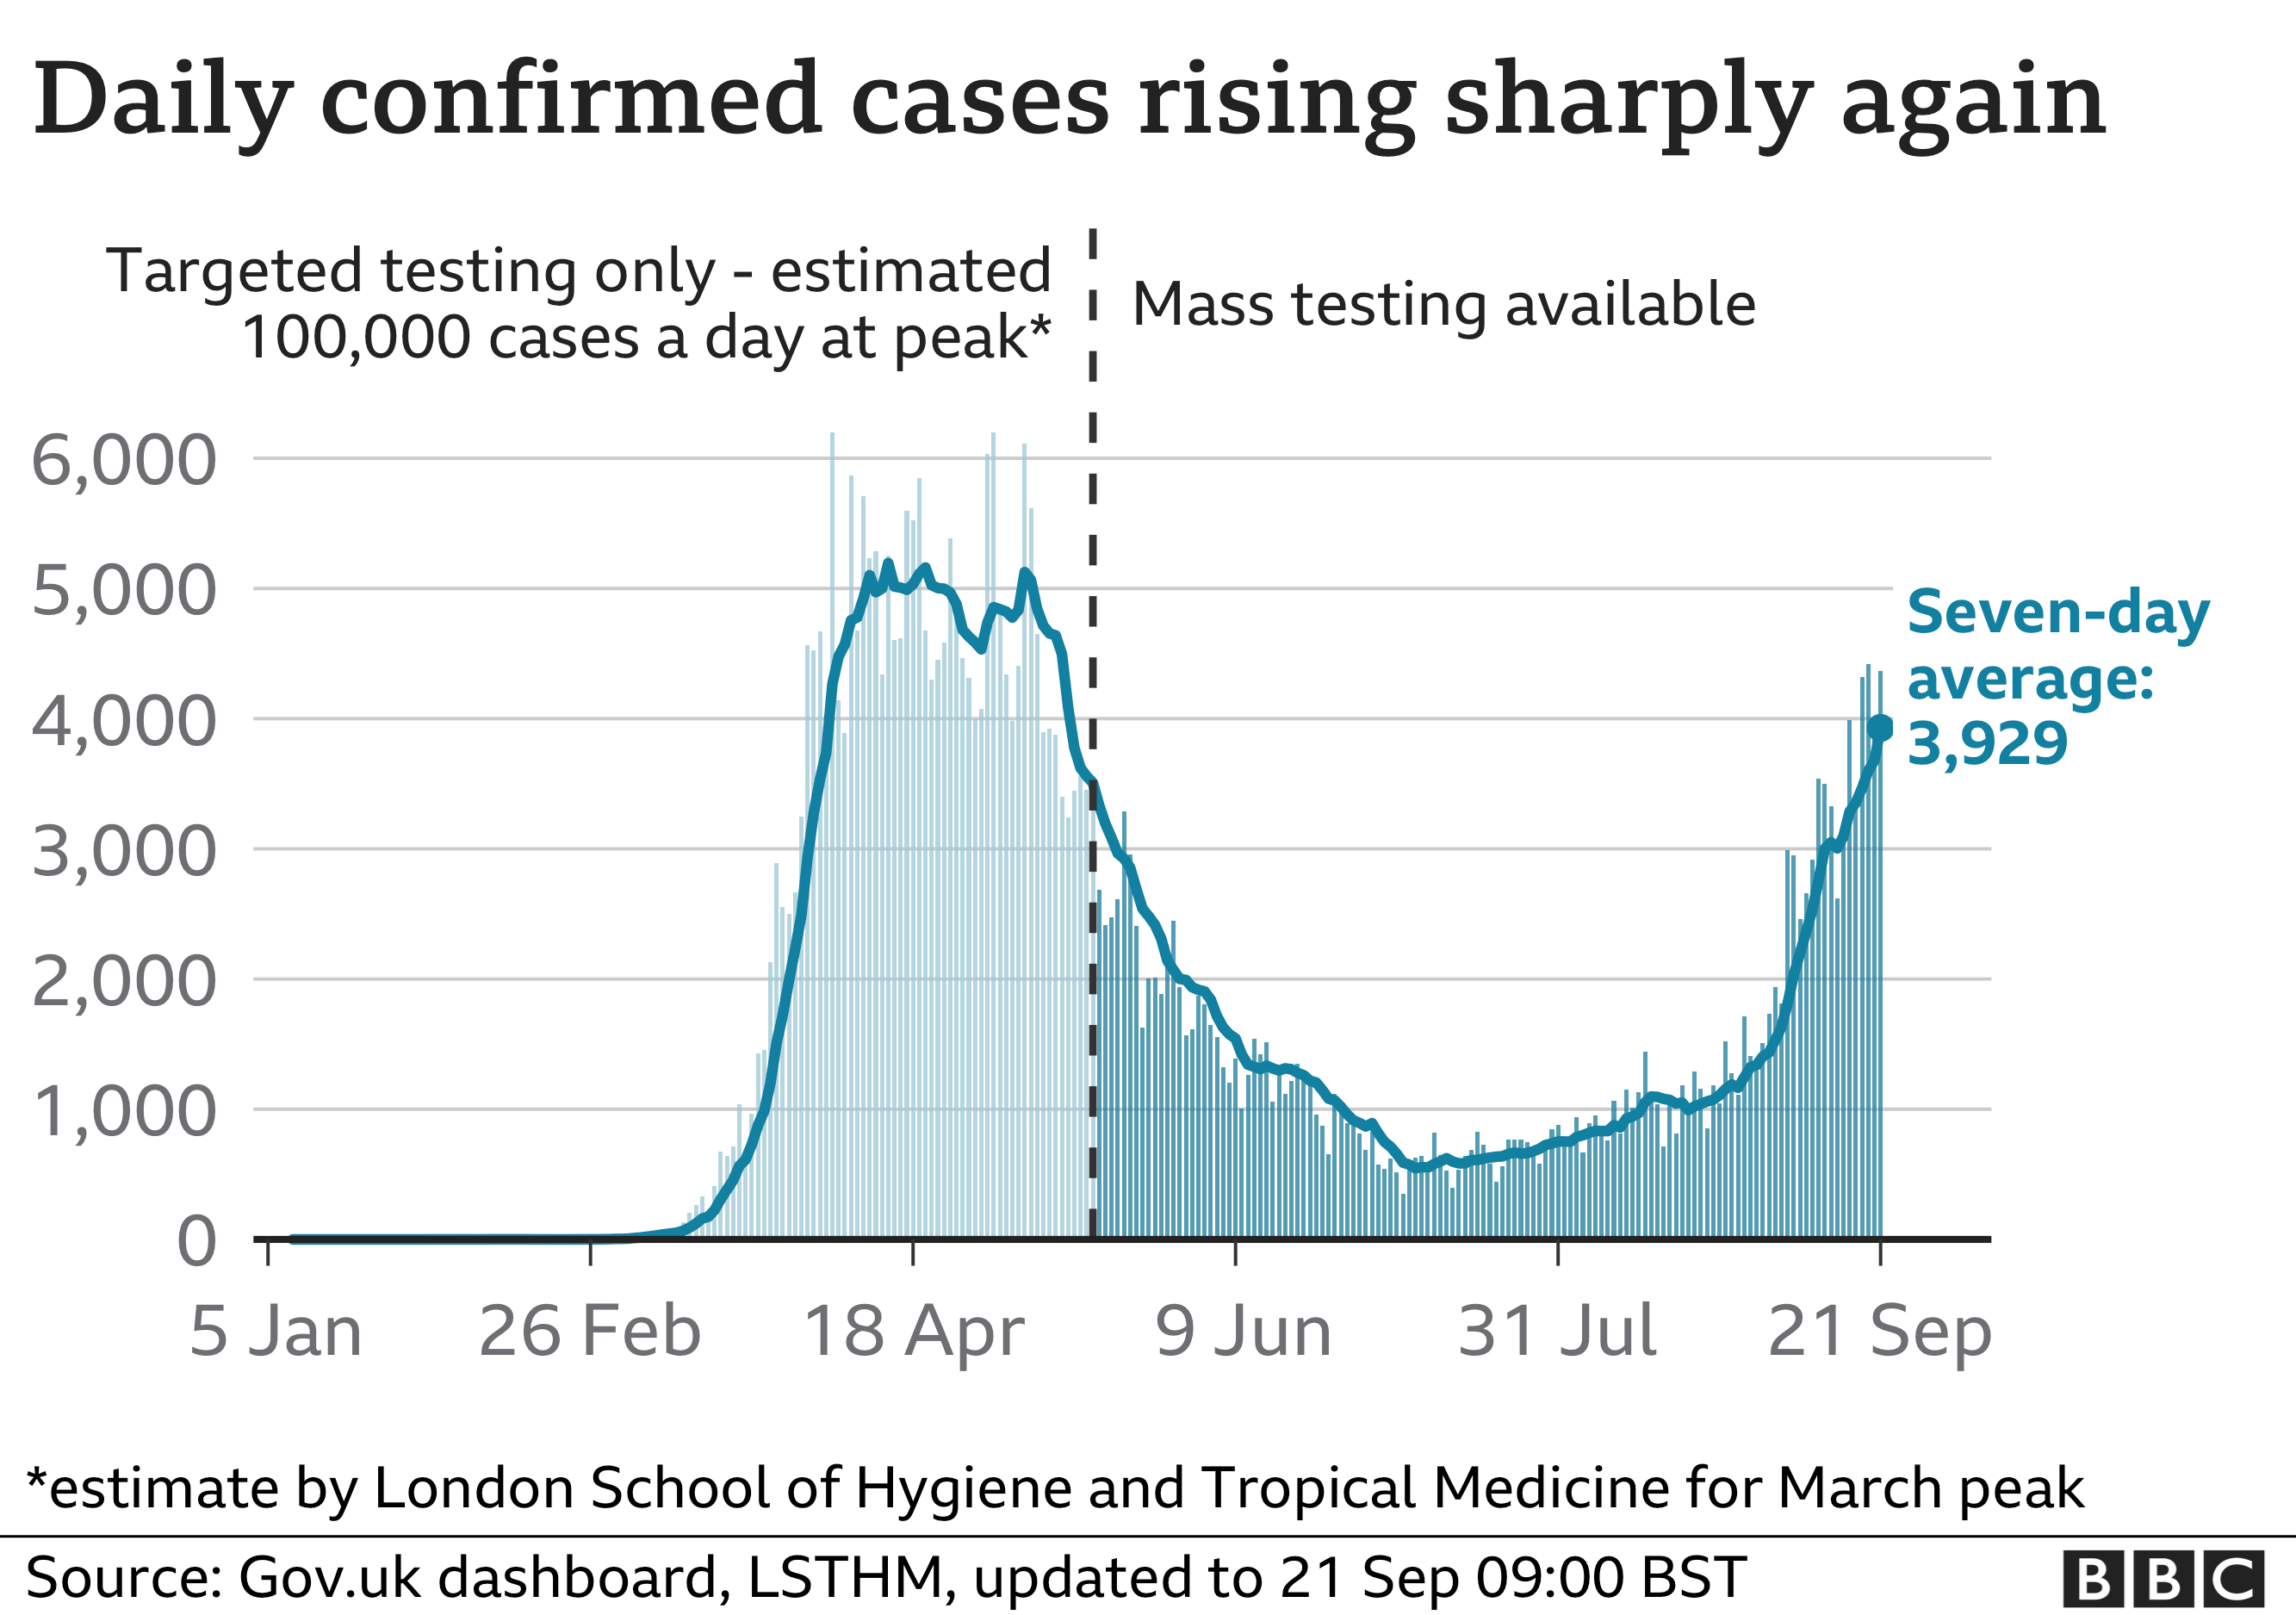 Daily confirmed cases in the UK